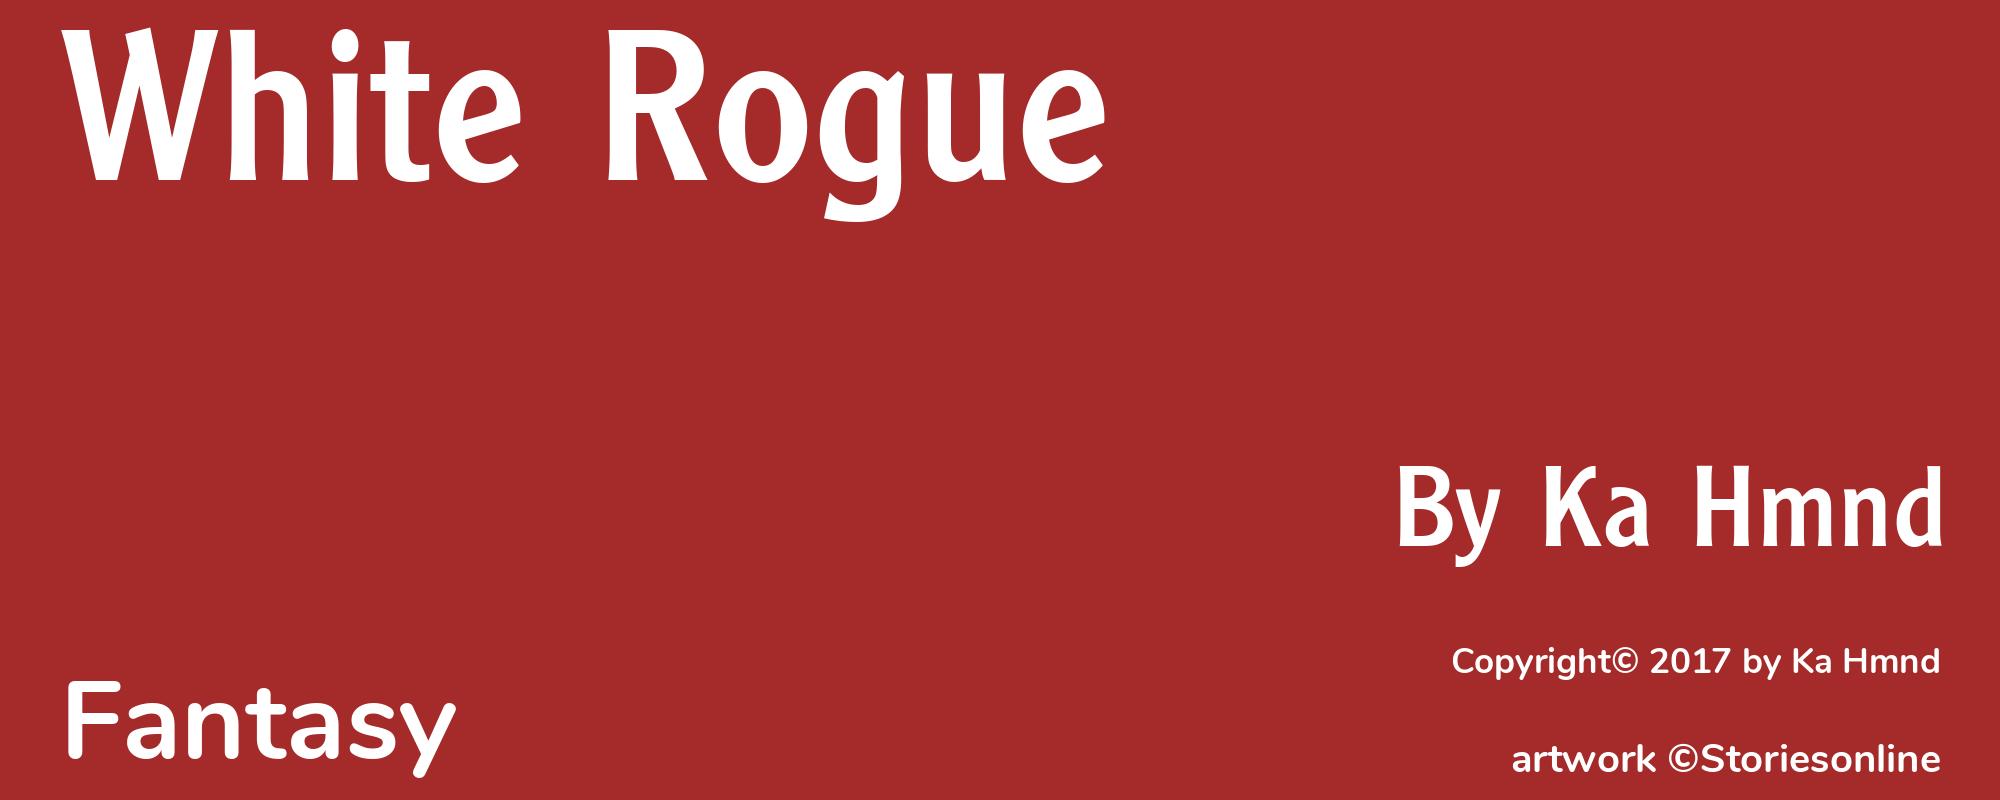 White Rogue - Cover